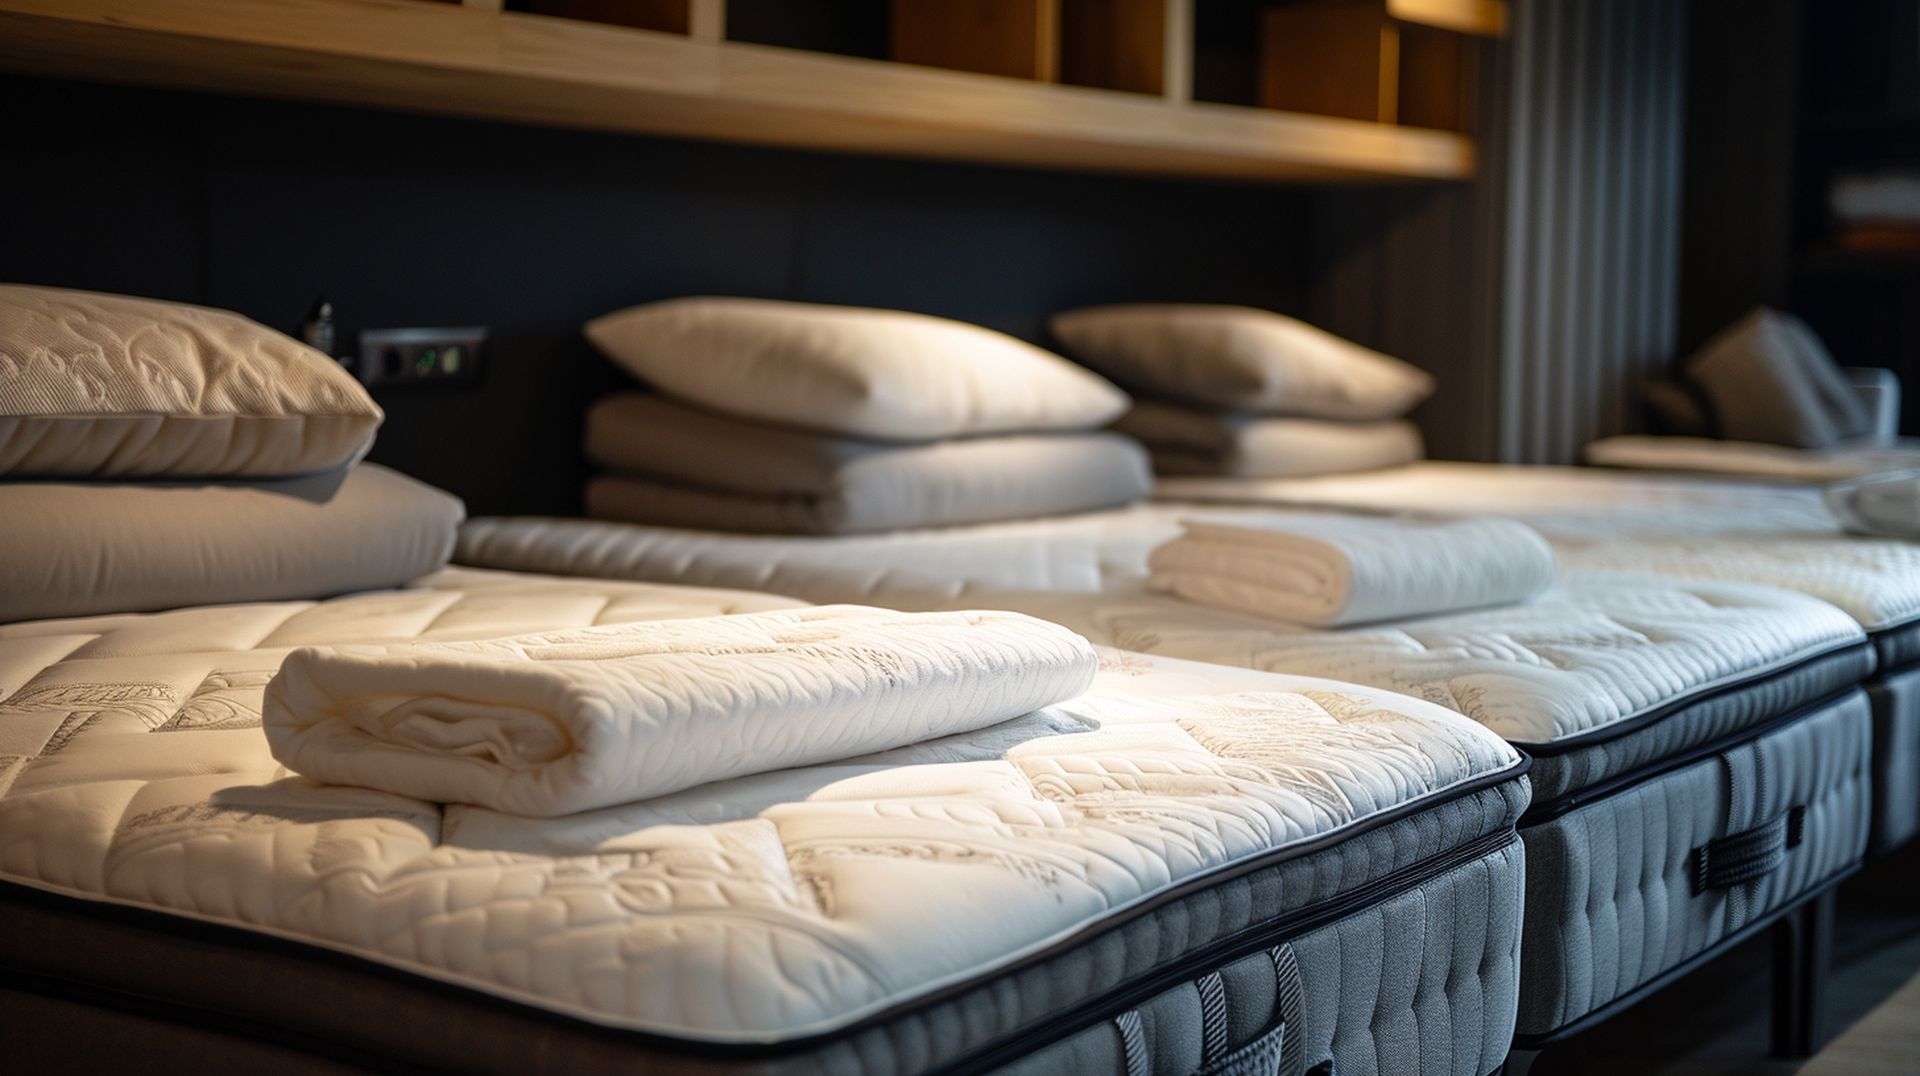 If you're looking for a new bed, mattress stores in Petaluma offer the best customer and delivery service, financing, and warranties in California